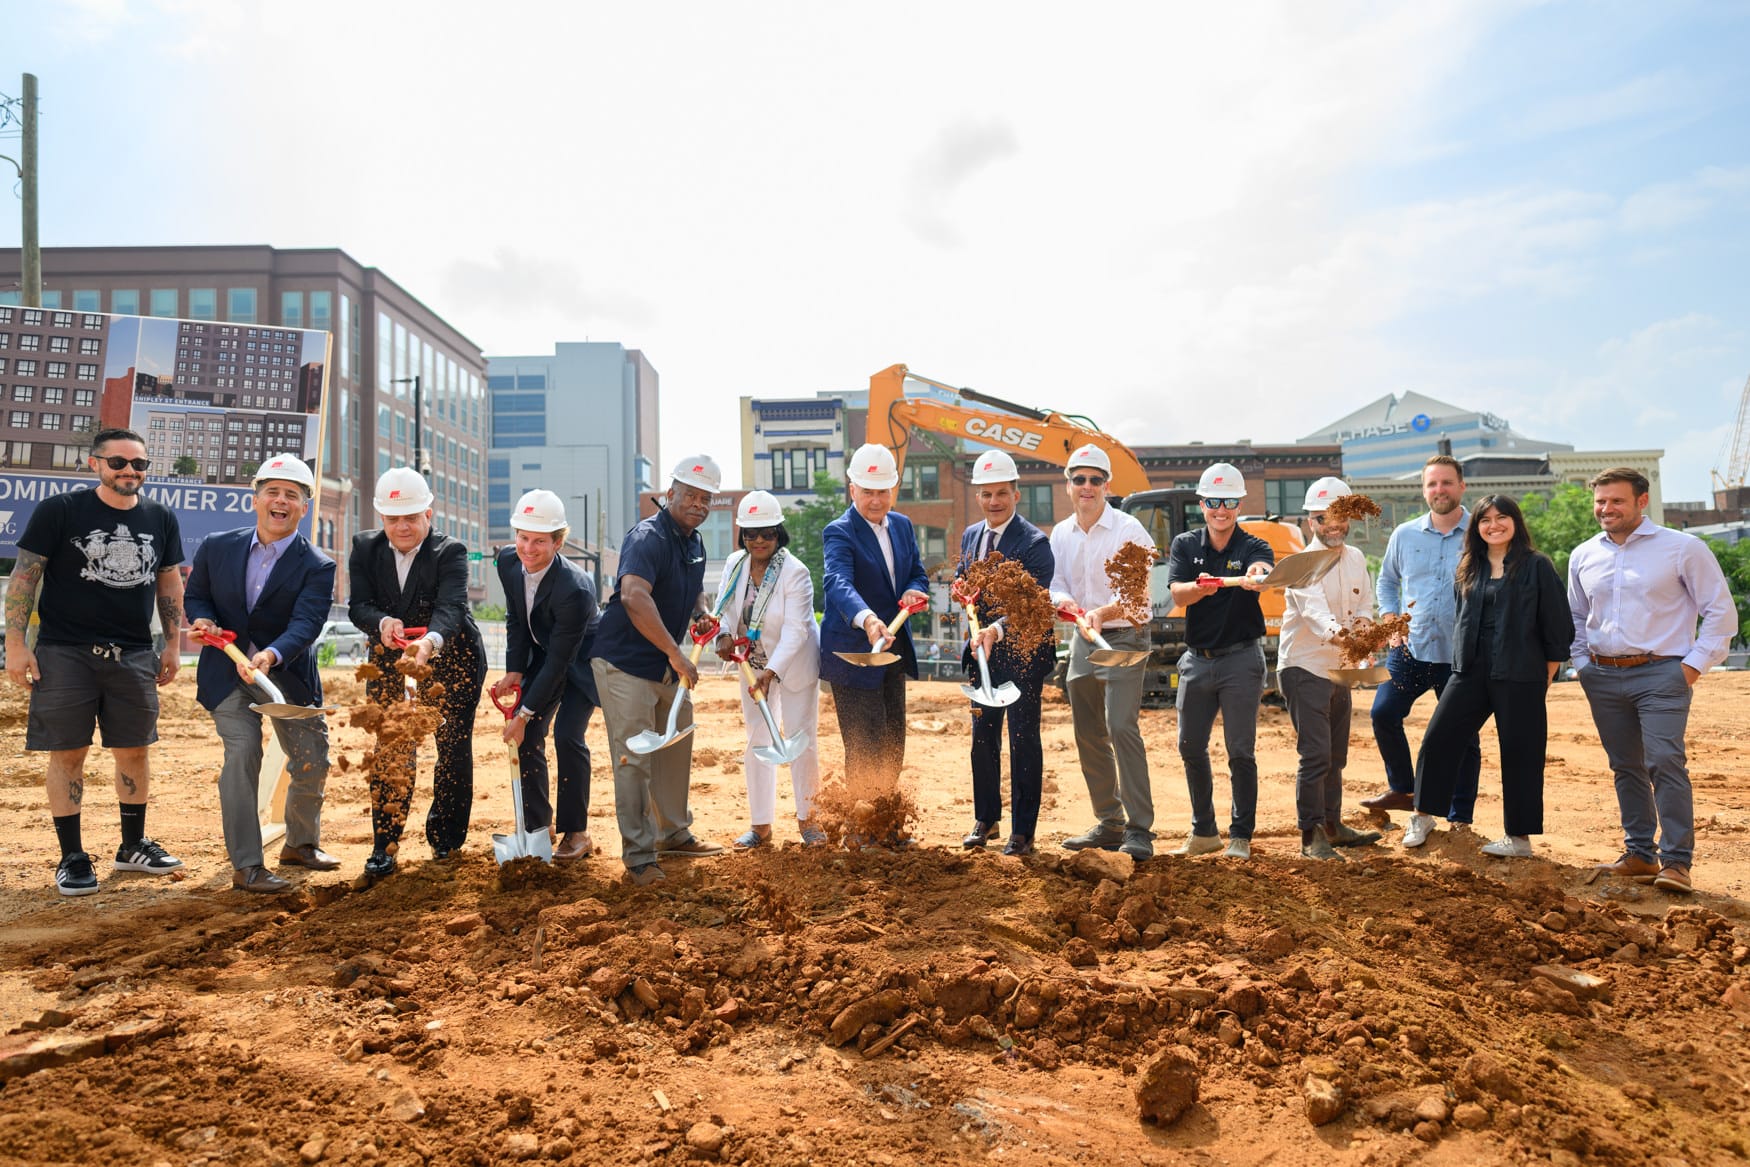 THE BUCCINI/POLLIN GROUP BREAKS GROUND ON LATEST MULTI-FAMILY PROJECT IN WILMINGTON